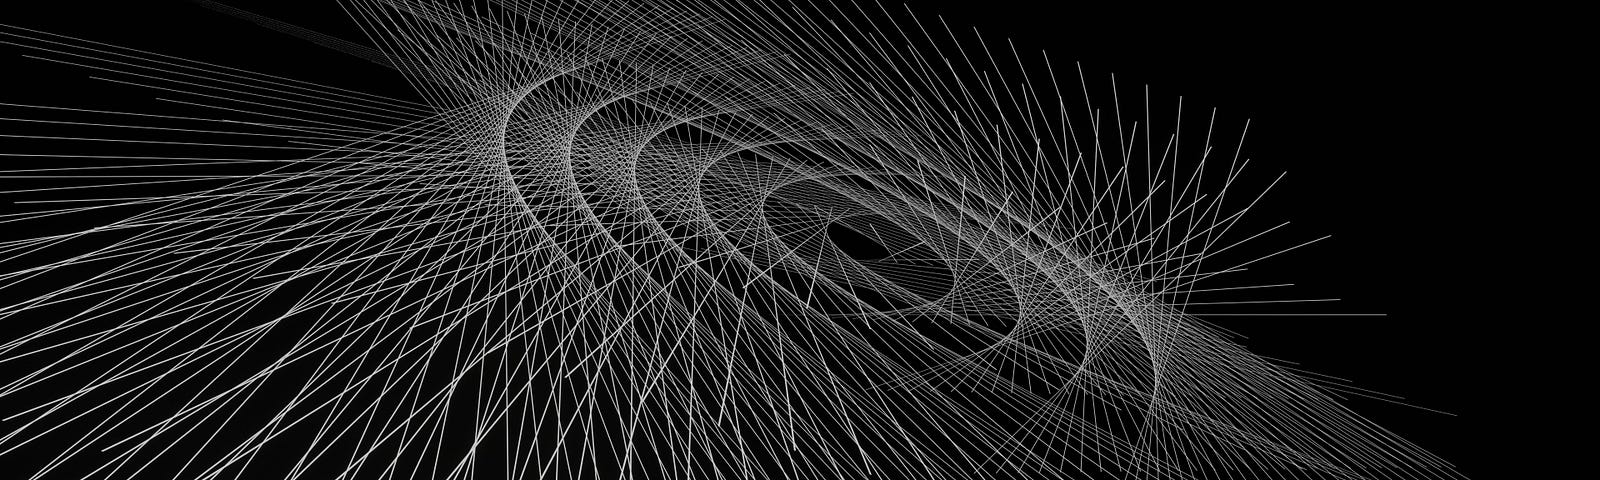 An abstract image of multiple lines